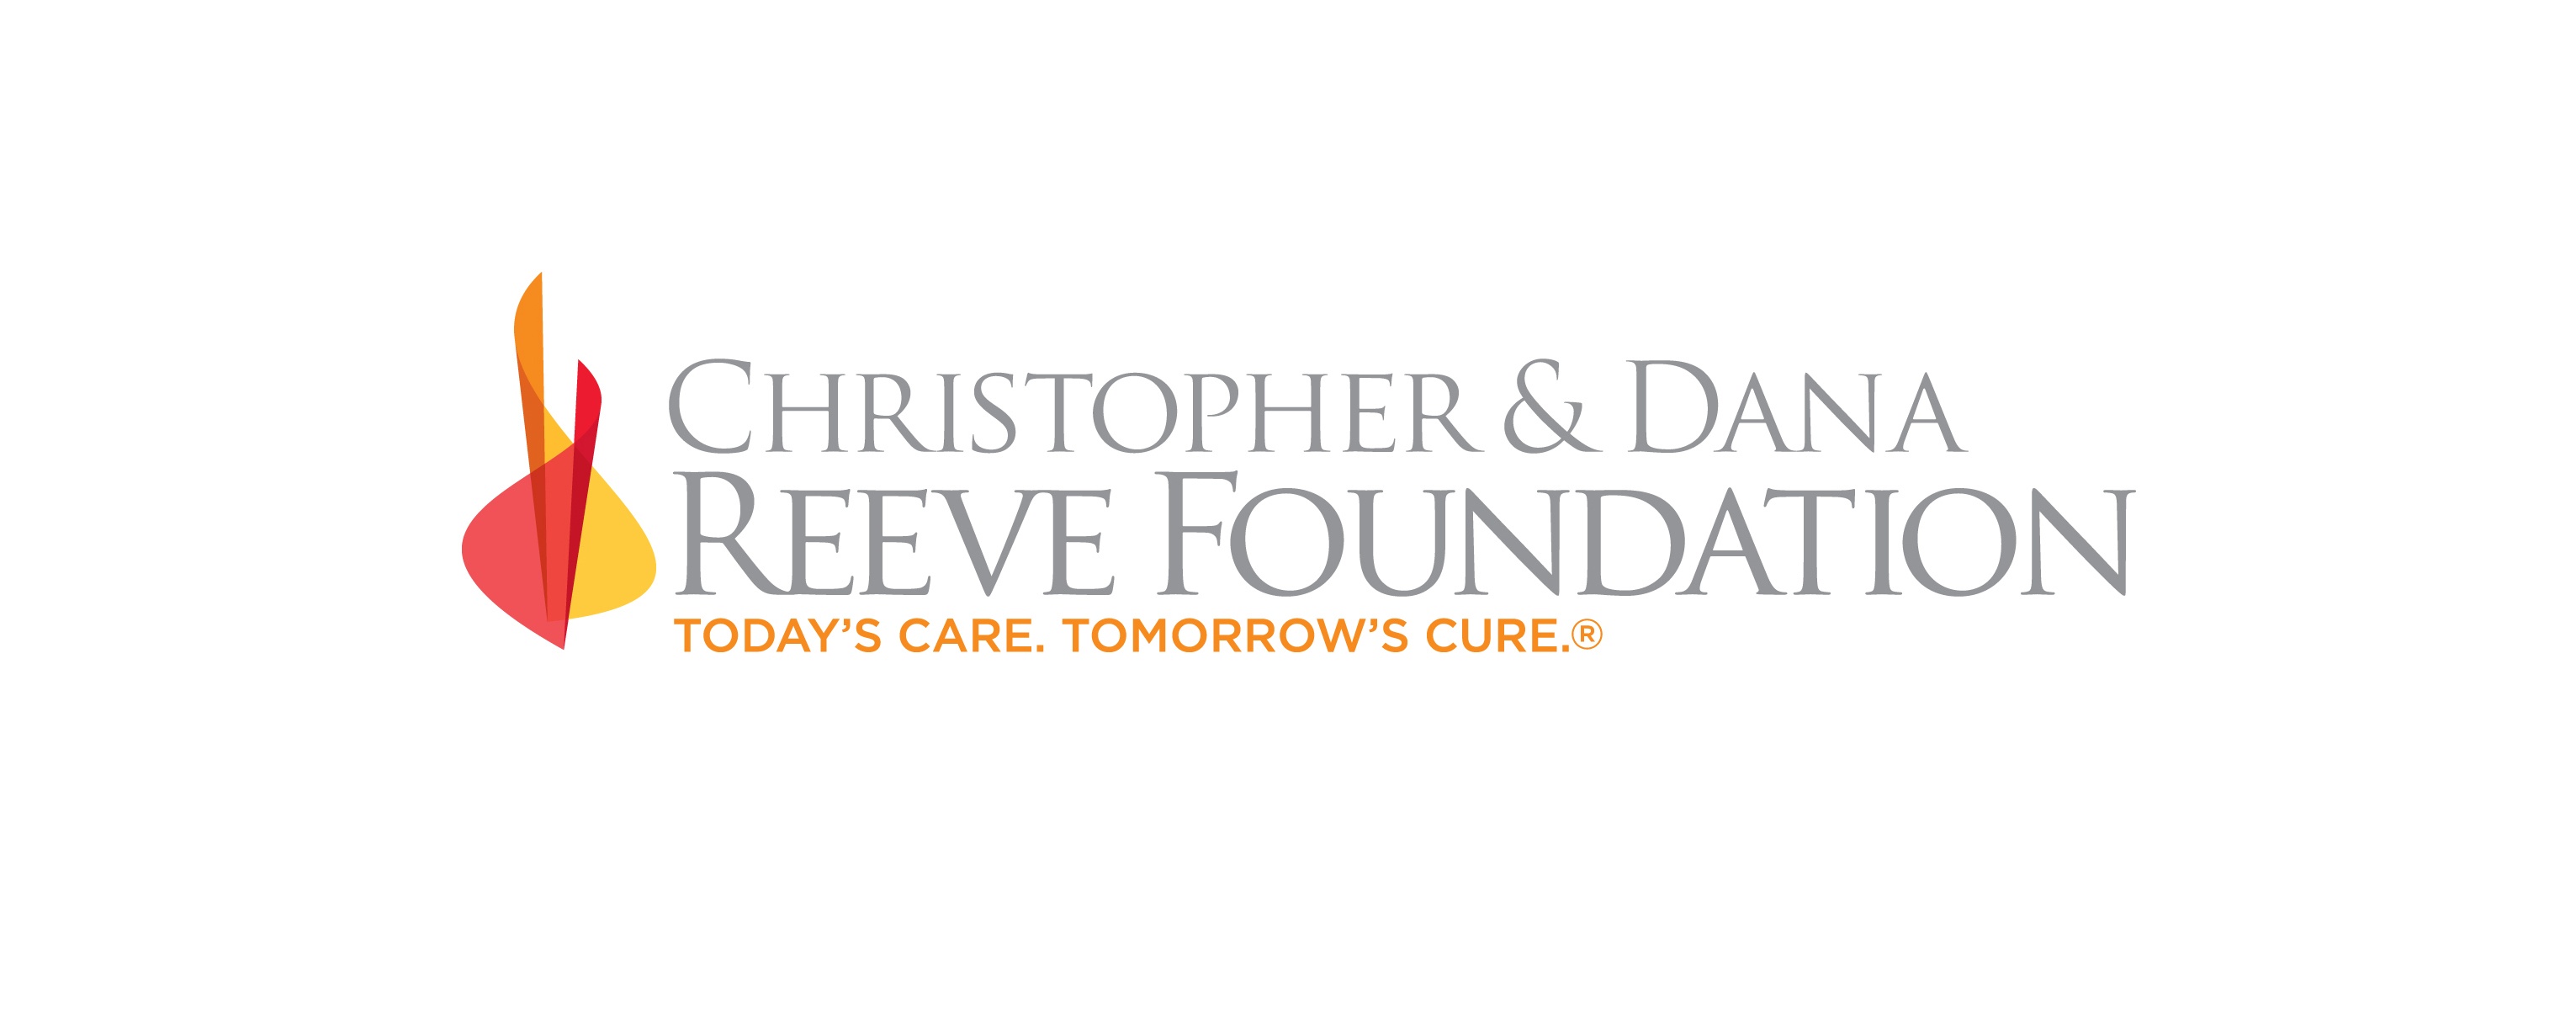 Reeve Foundation